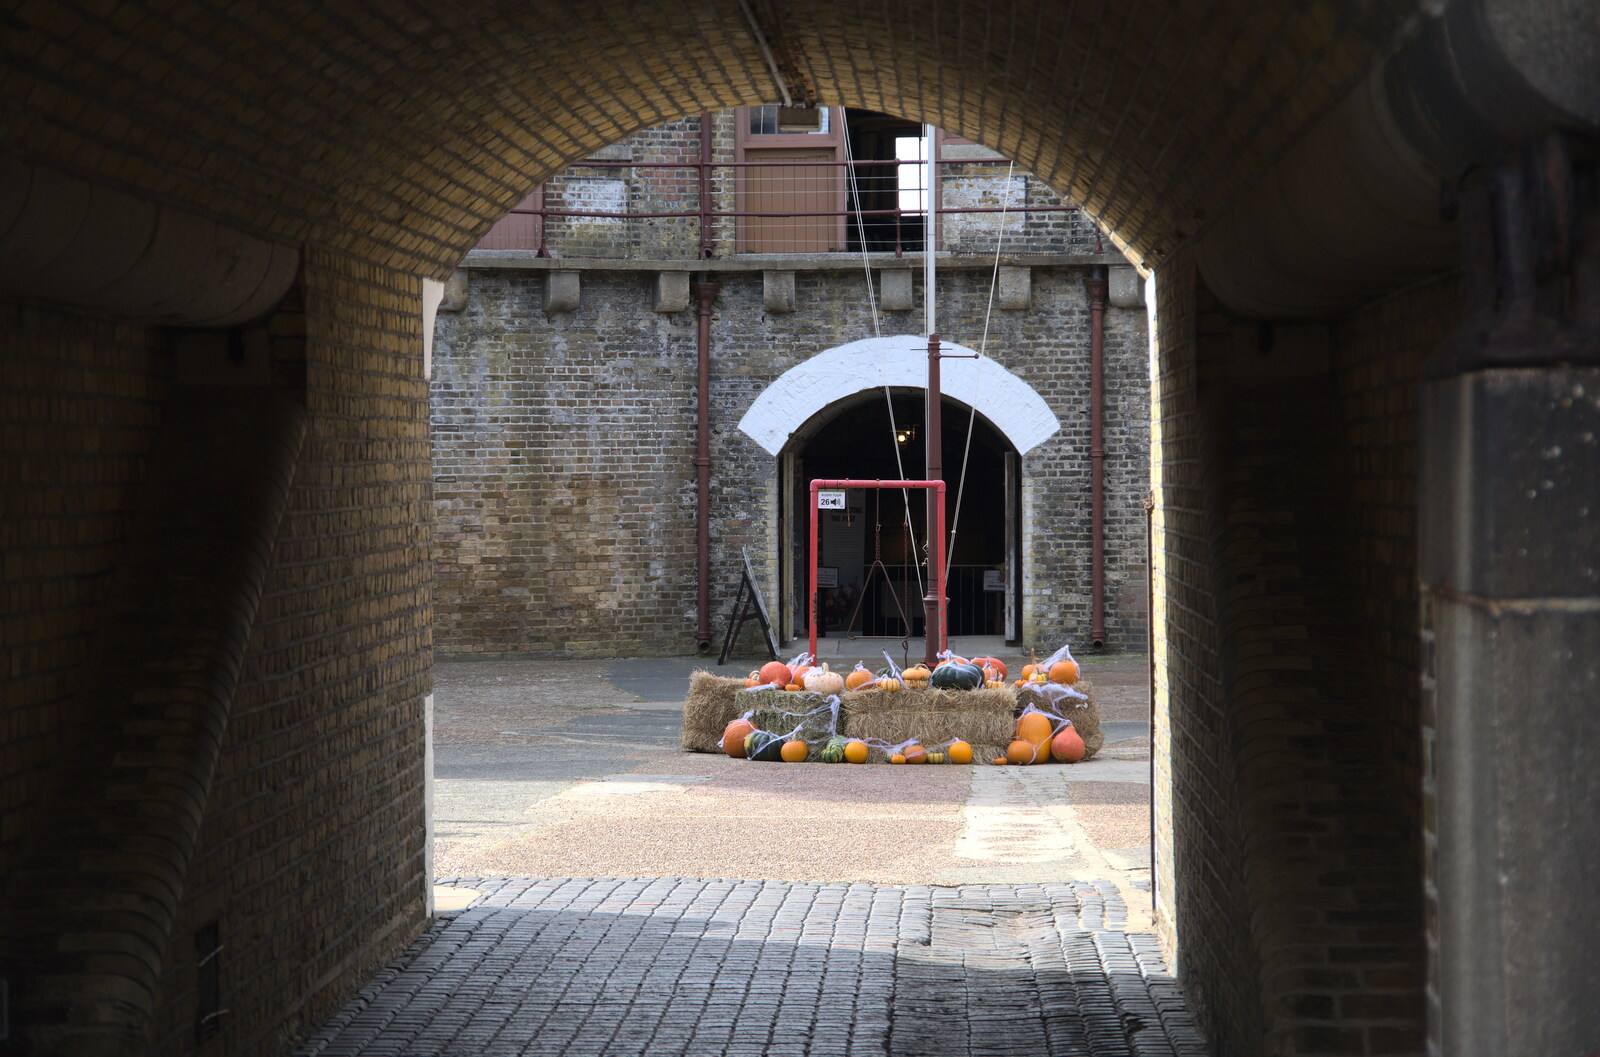 A view through the entrance arch from A Trip to Landguard Fort, Felixstowe, Suffolk - 16th October 2022